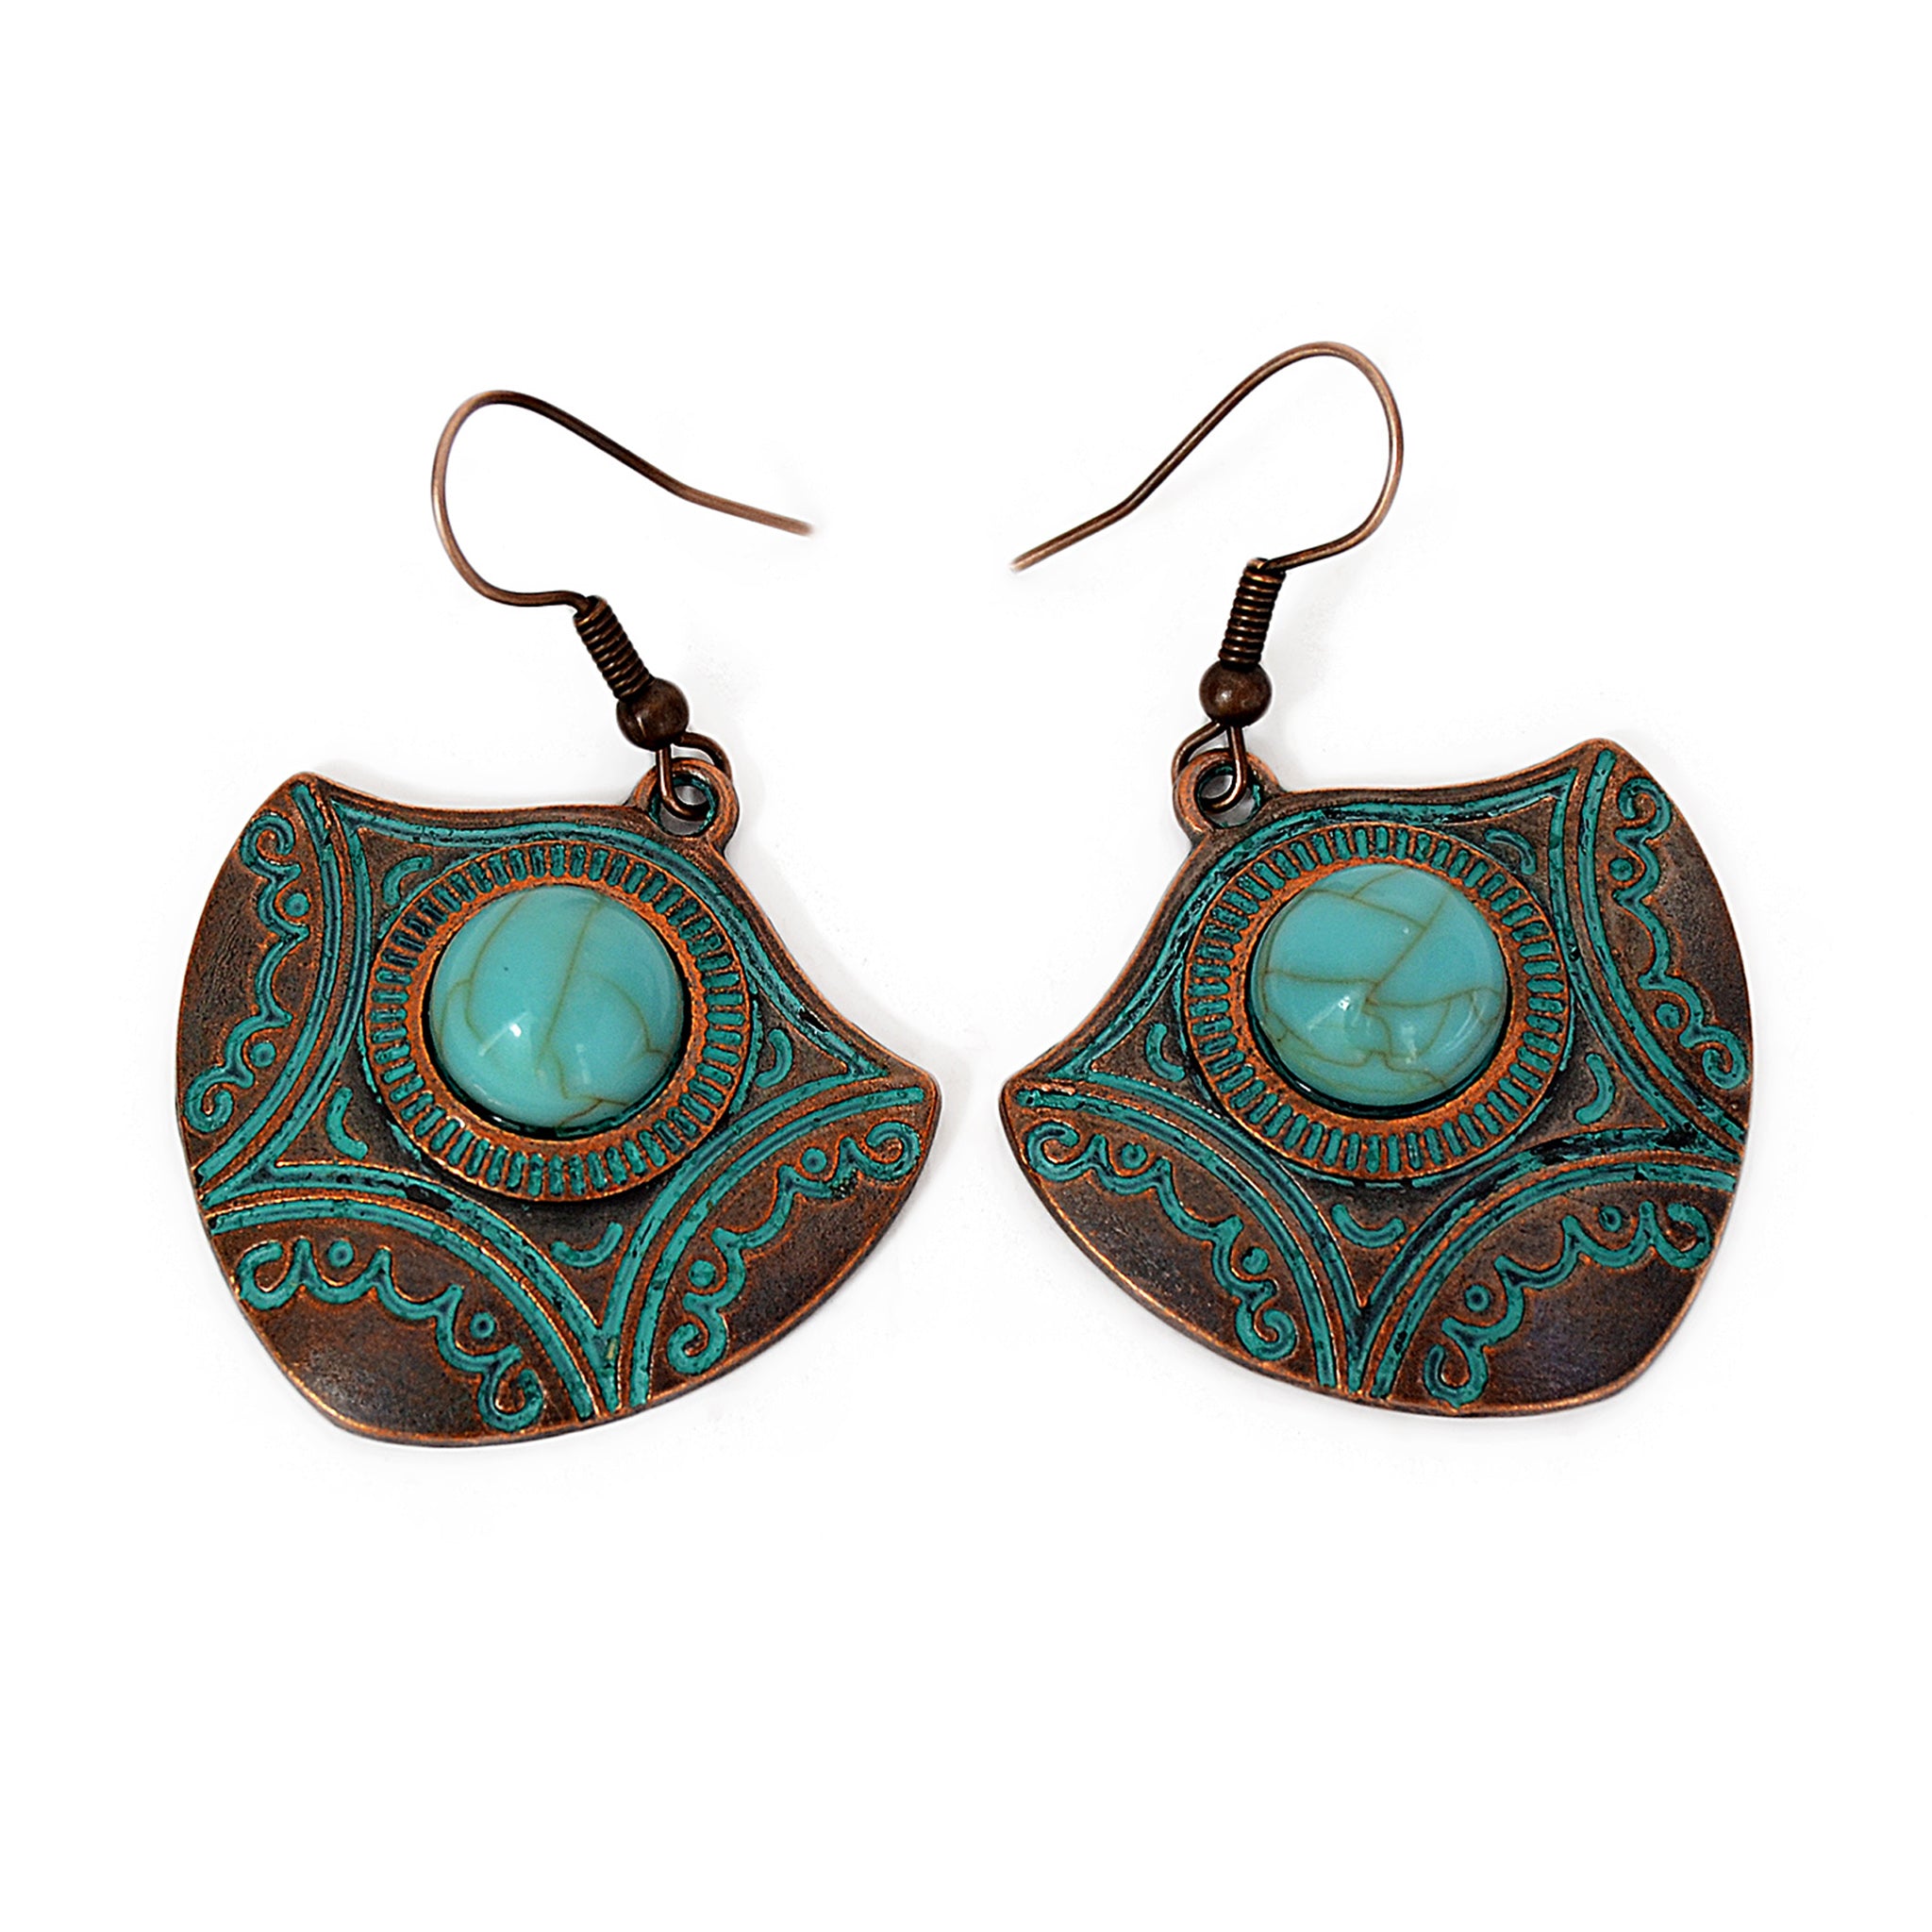 Hook arrow earrings with turquoise bead and old blue patina on copper